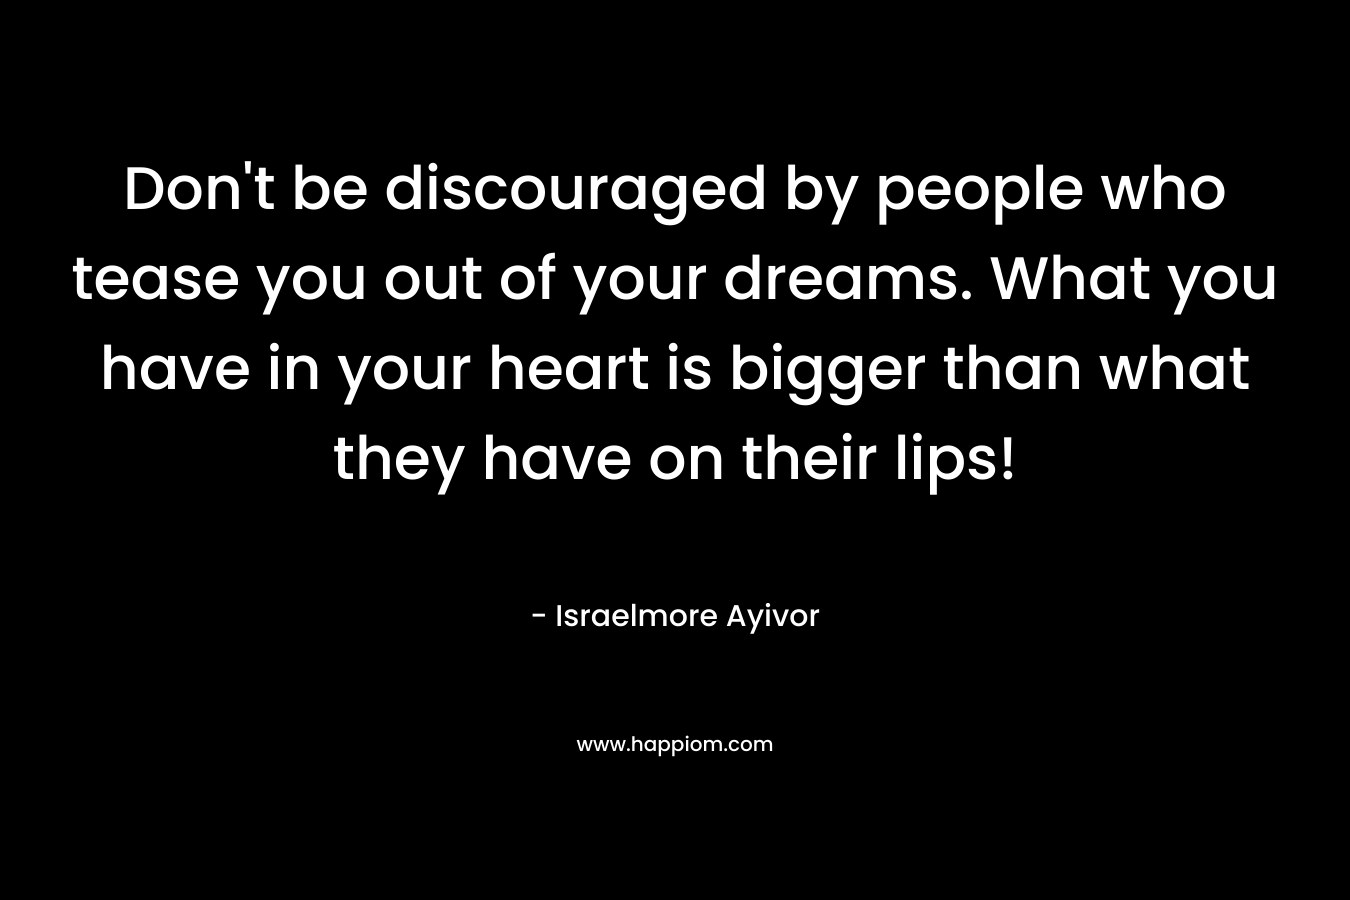 Don't be discouraged by people who tease you out of your dreams. What you have in your heart is bigger than what they have on their lips!